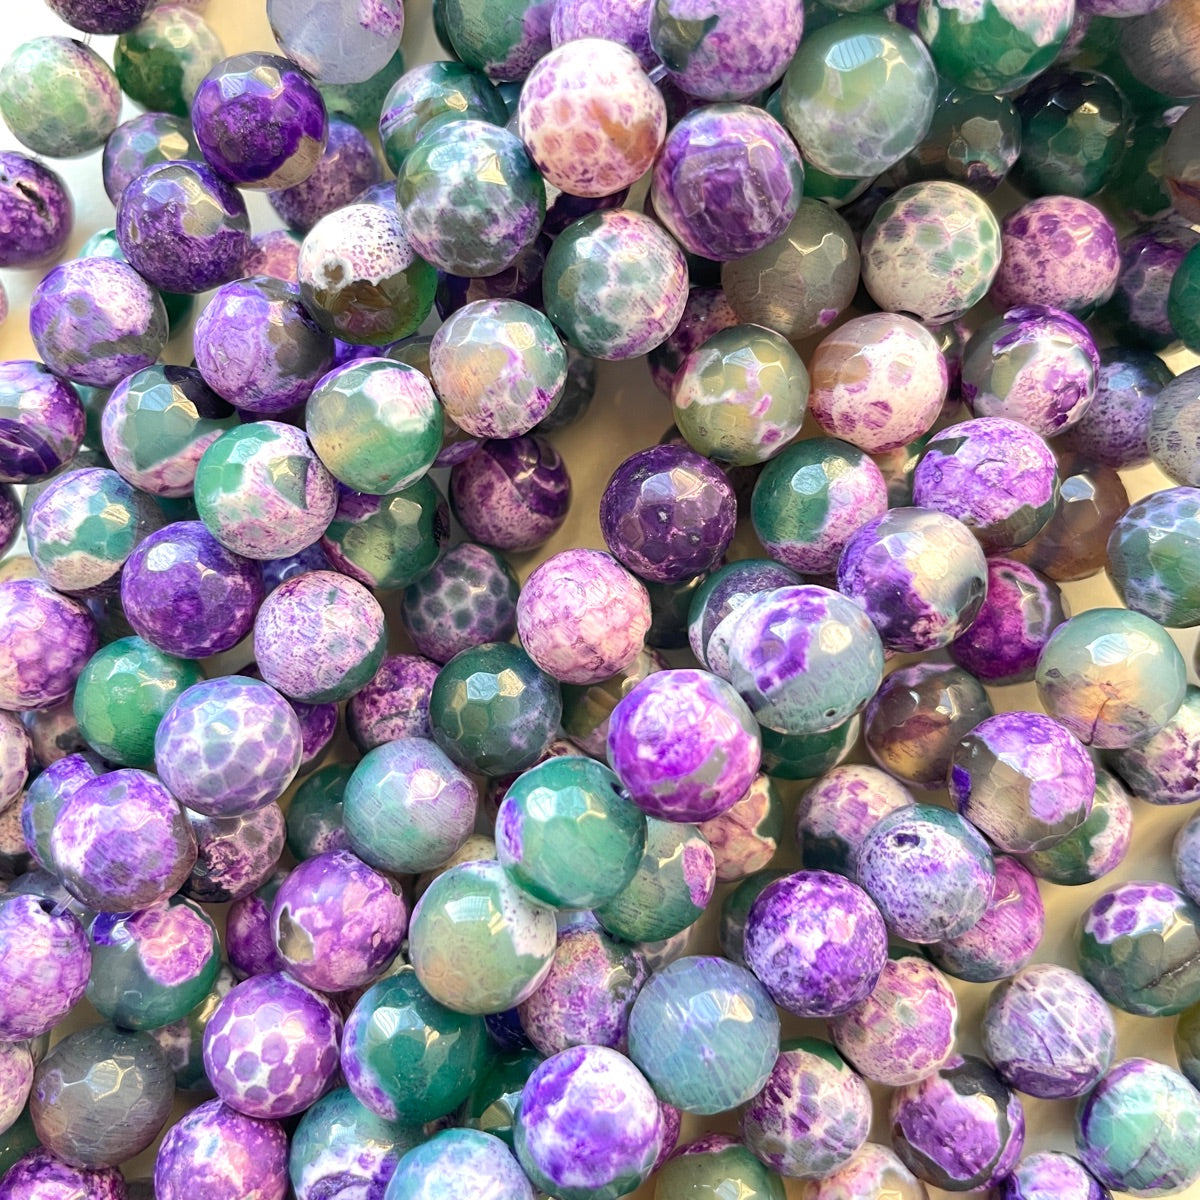 2 Strands/lot 10mm Colorful Hot Pink/Fuchsia Blue Purple Green Fire Agate Faceted Stone Beads Purple Green Stone Beads Faceted Agate Beads New Beads Arrivals Charms Beads Beyond